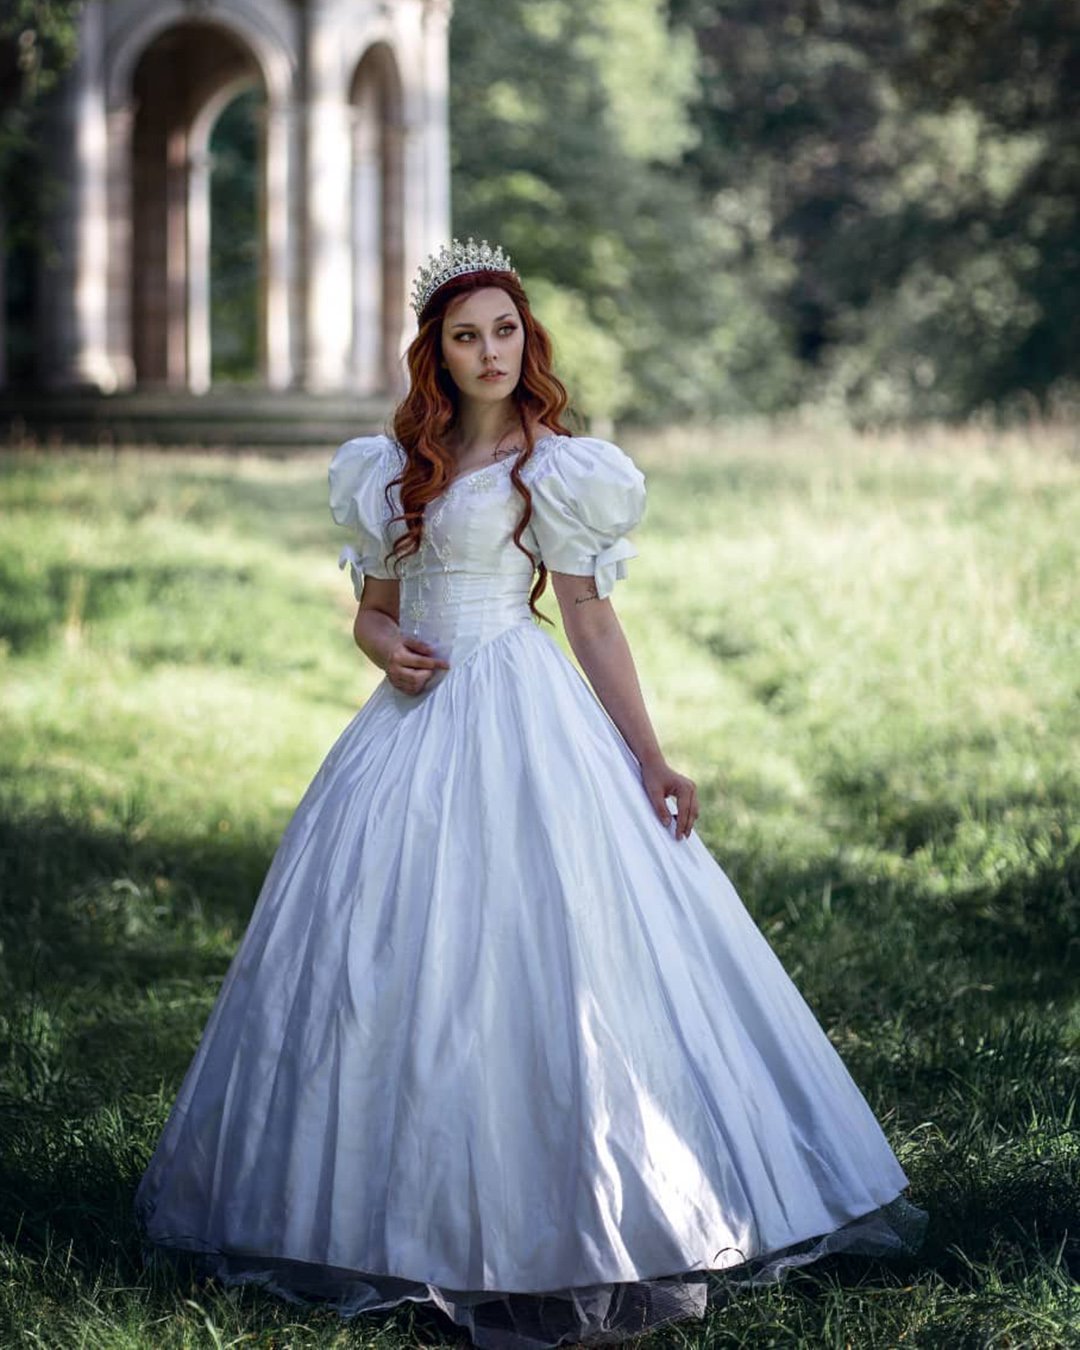 disney wedding dresses ball gown with puff sleeves simple snow white lauracalandtphoto